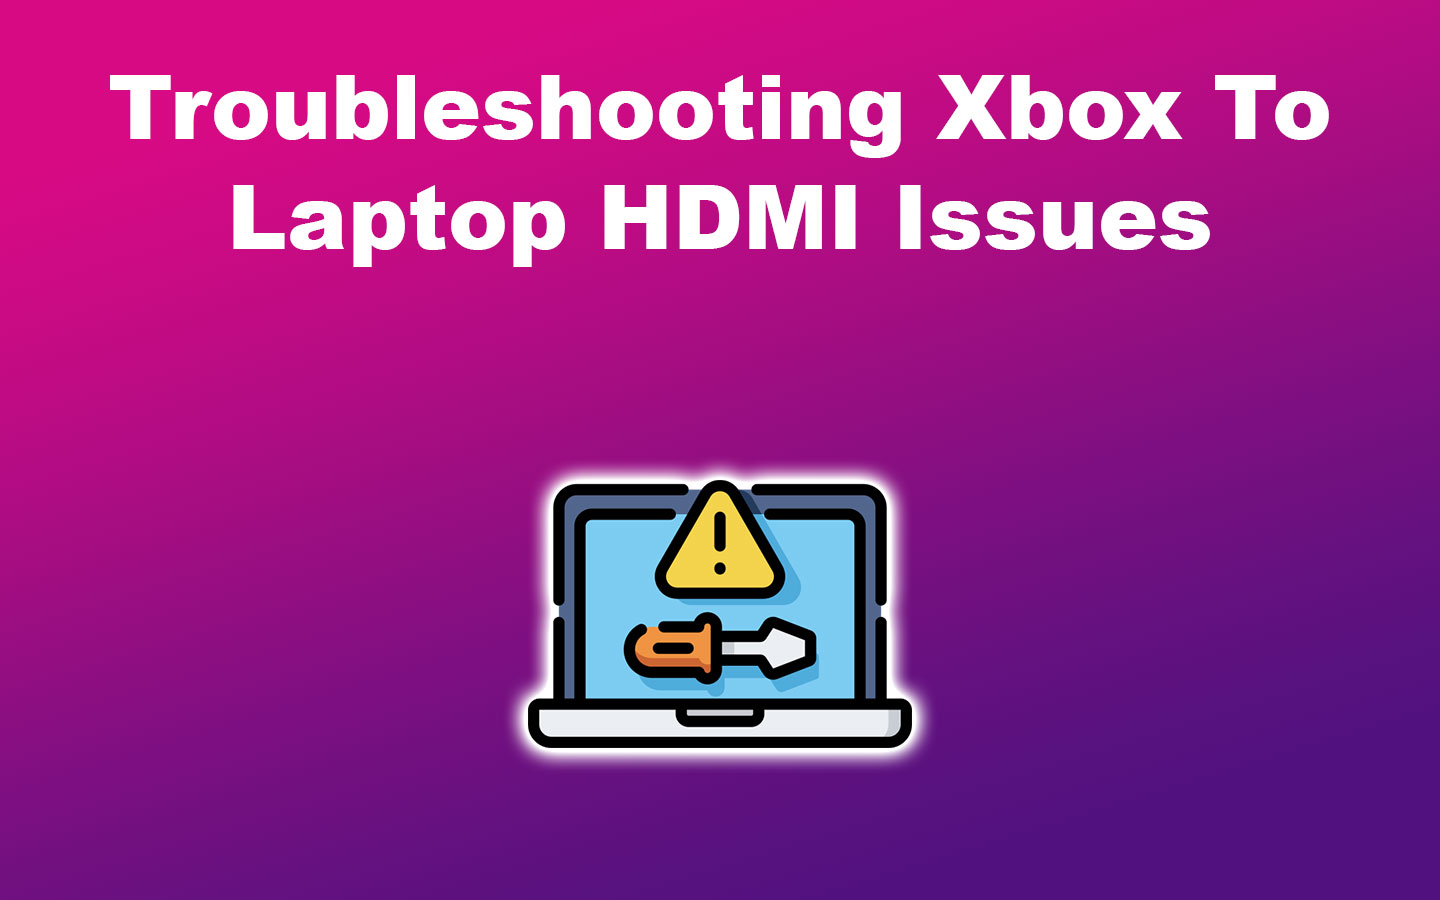 Troubleshooting Xbox To Laptop HDMI Issues